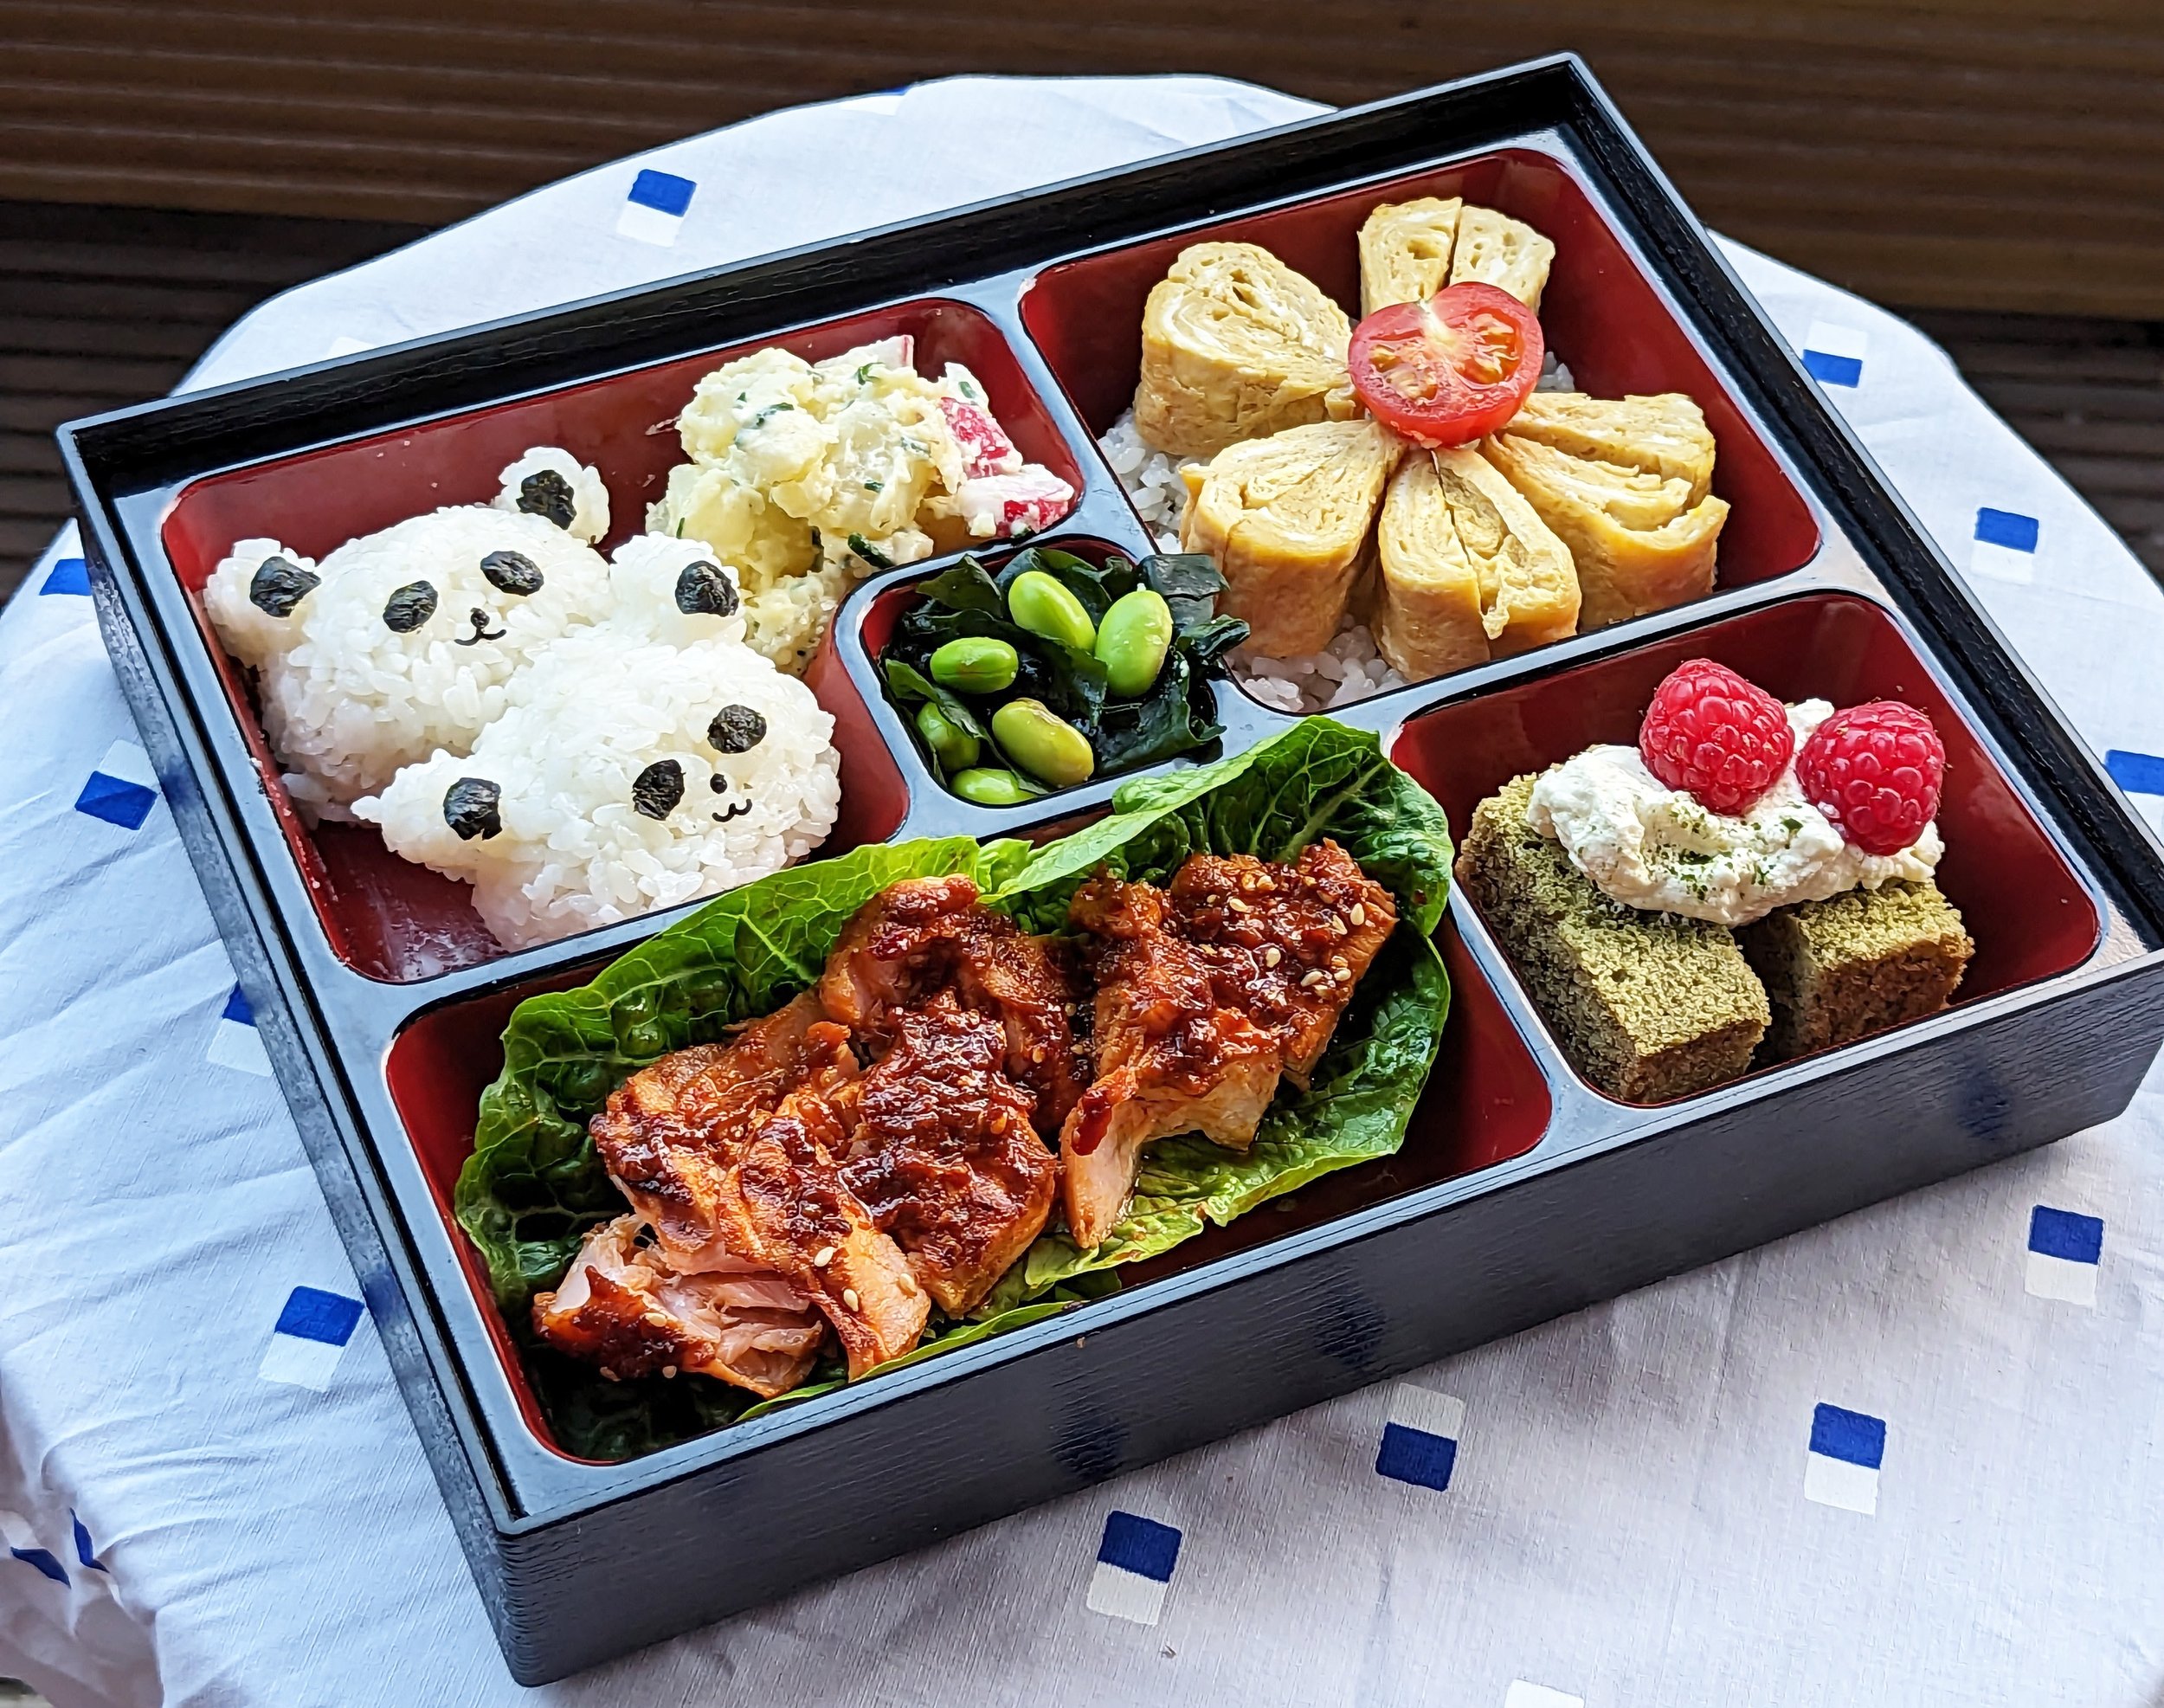 Japanese BENTO BOX Lunch Ideas #11 - Feature about Japanese Sandwiches 